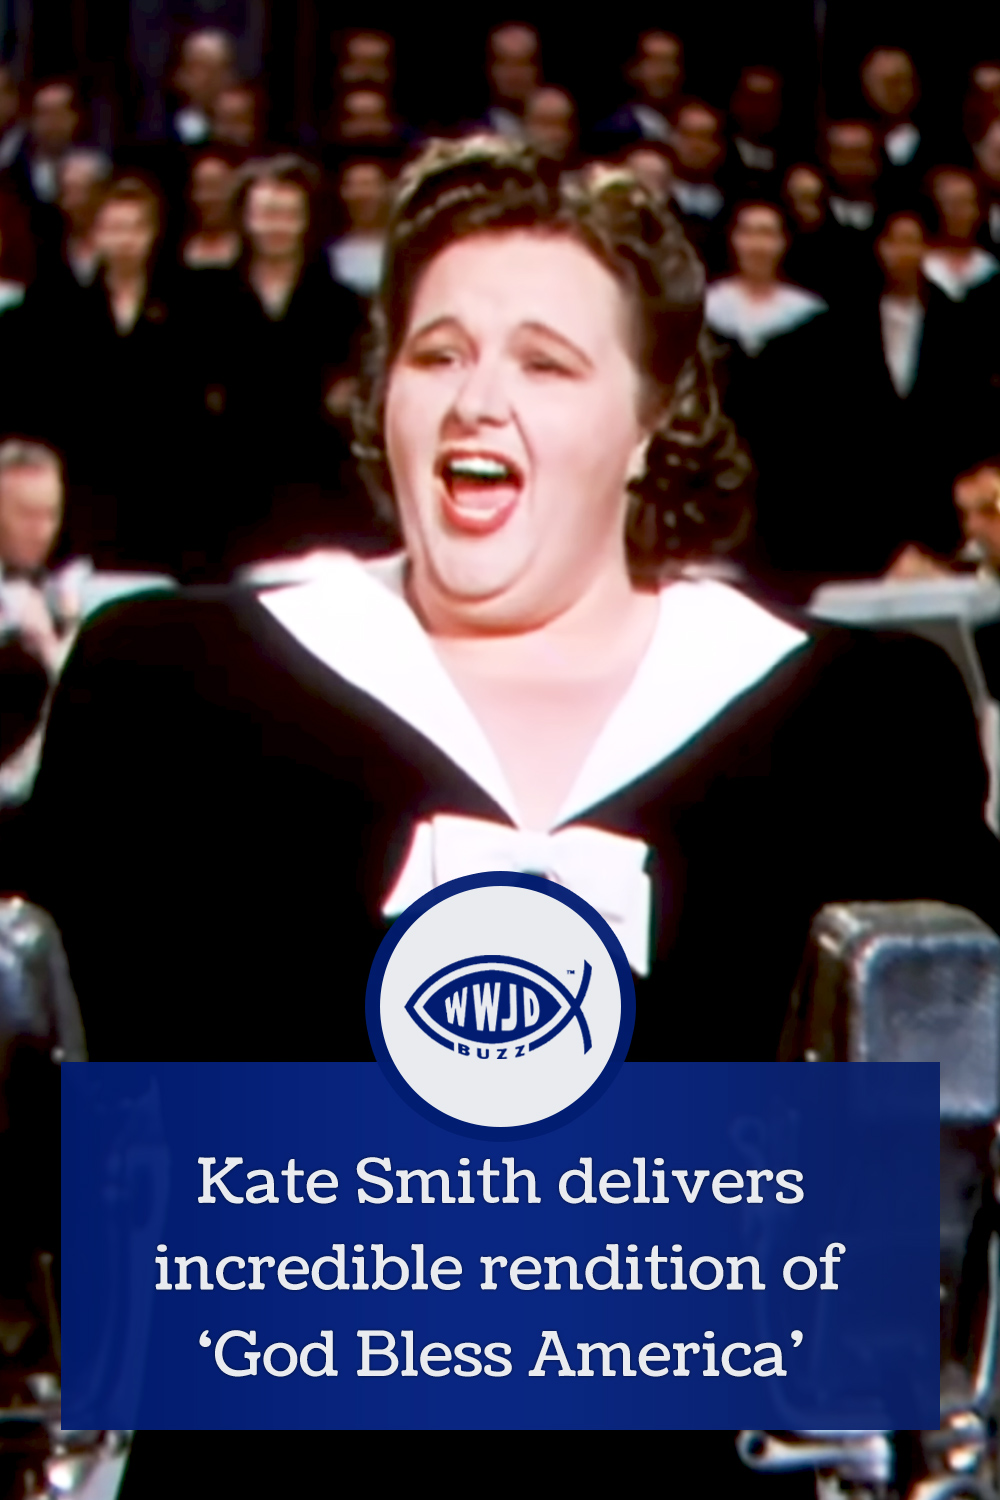 Kate Smith delivers incredible rendition of ‘God Bless America’